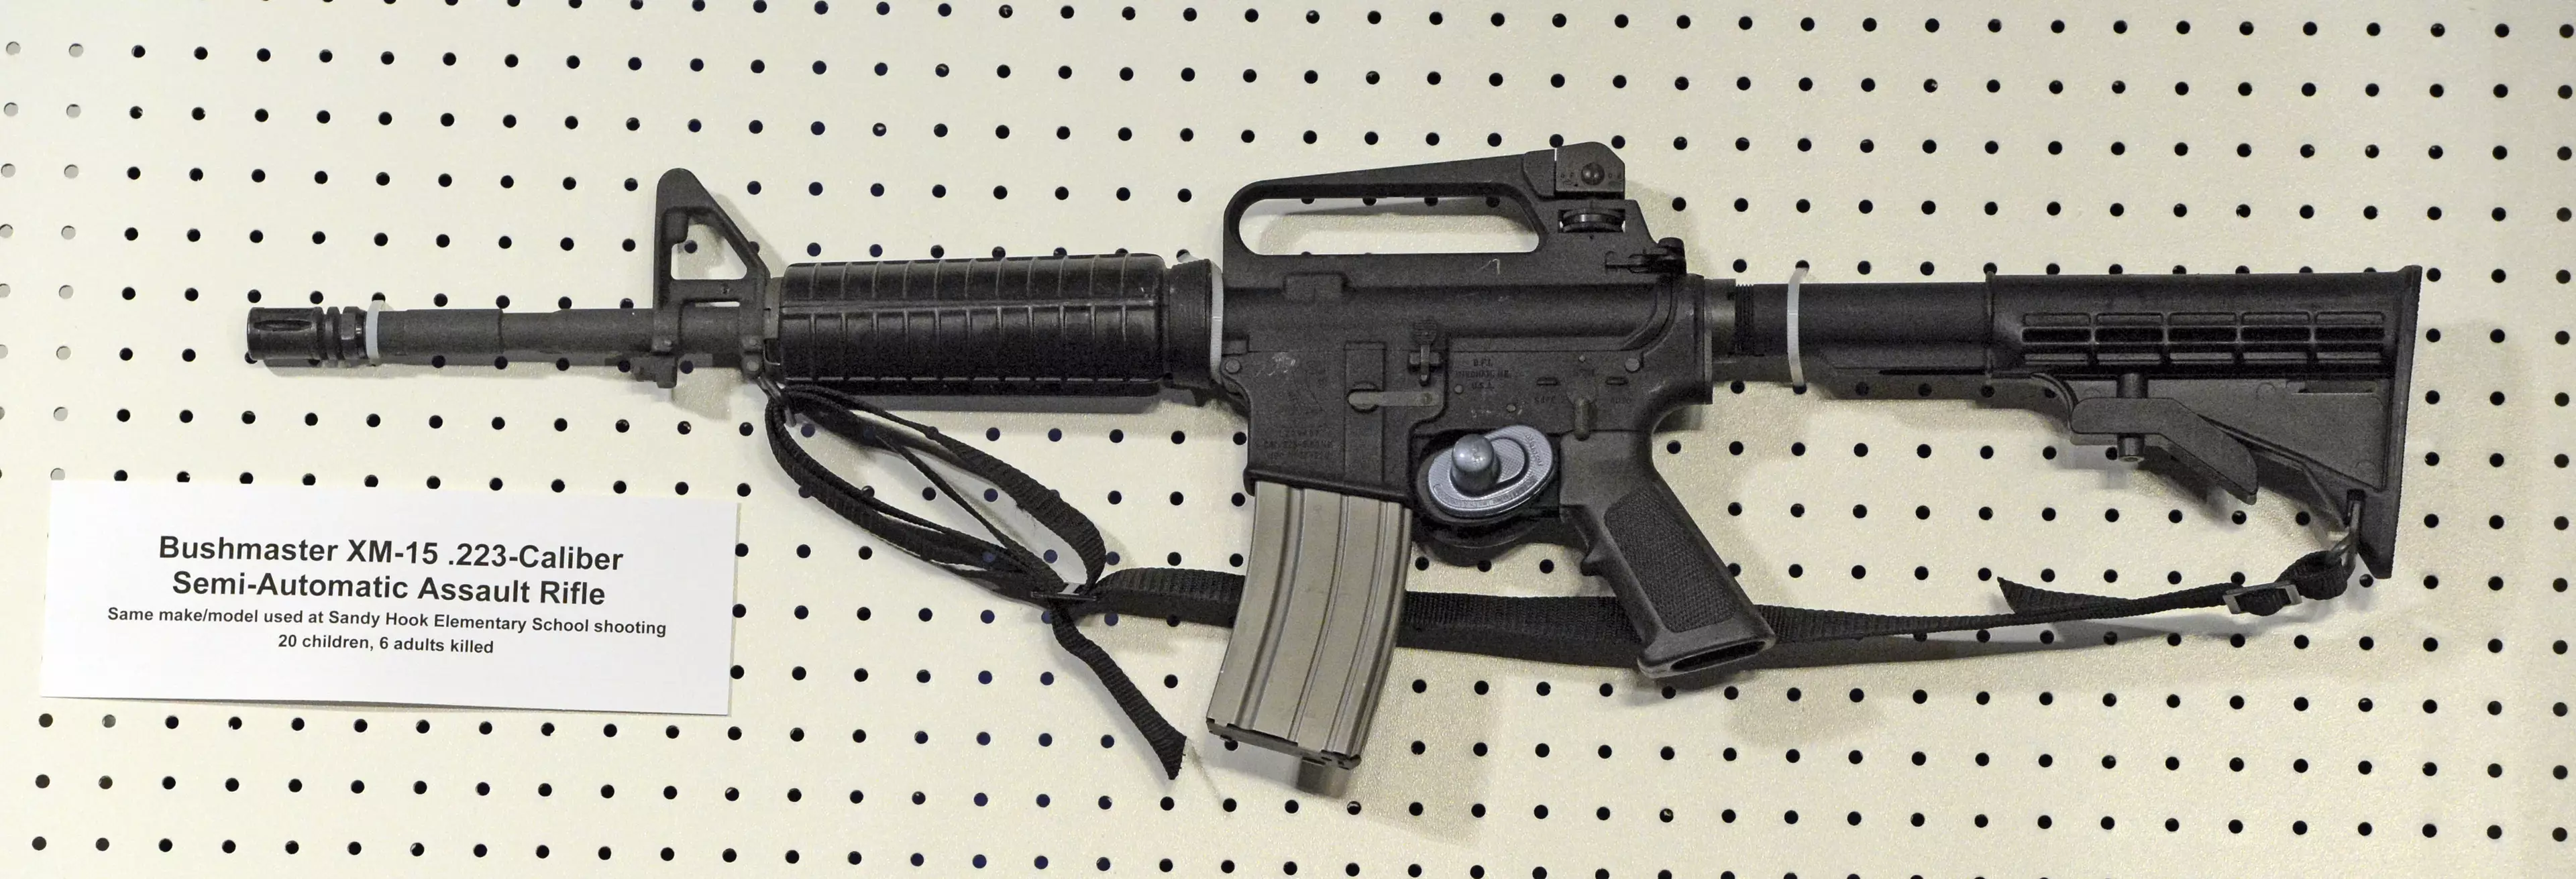 An AR-15 semi-automatic weapon - which has been used in many US mass shootings.